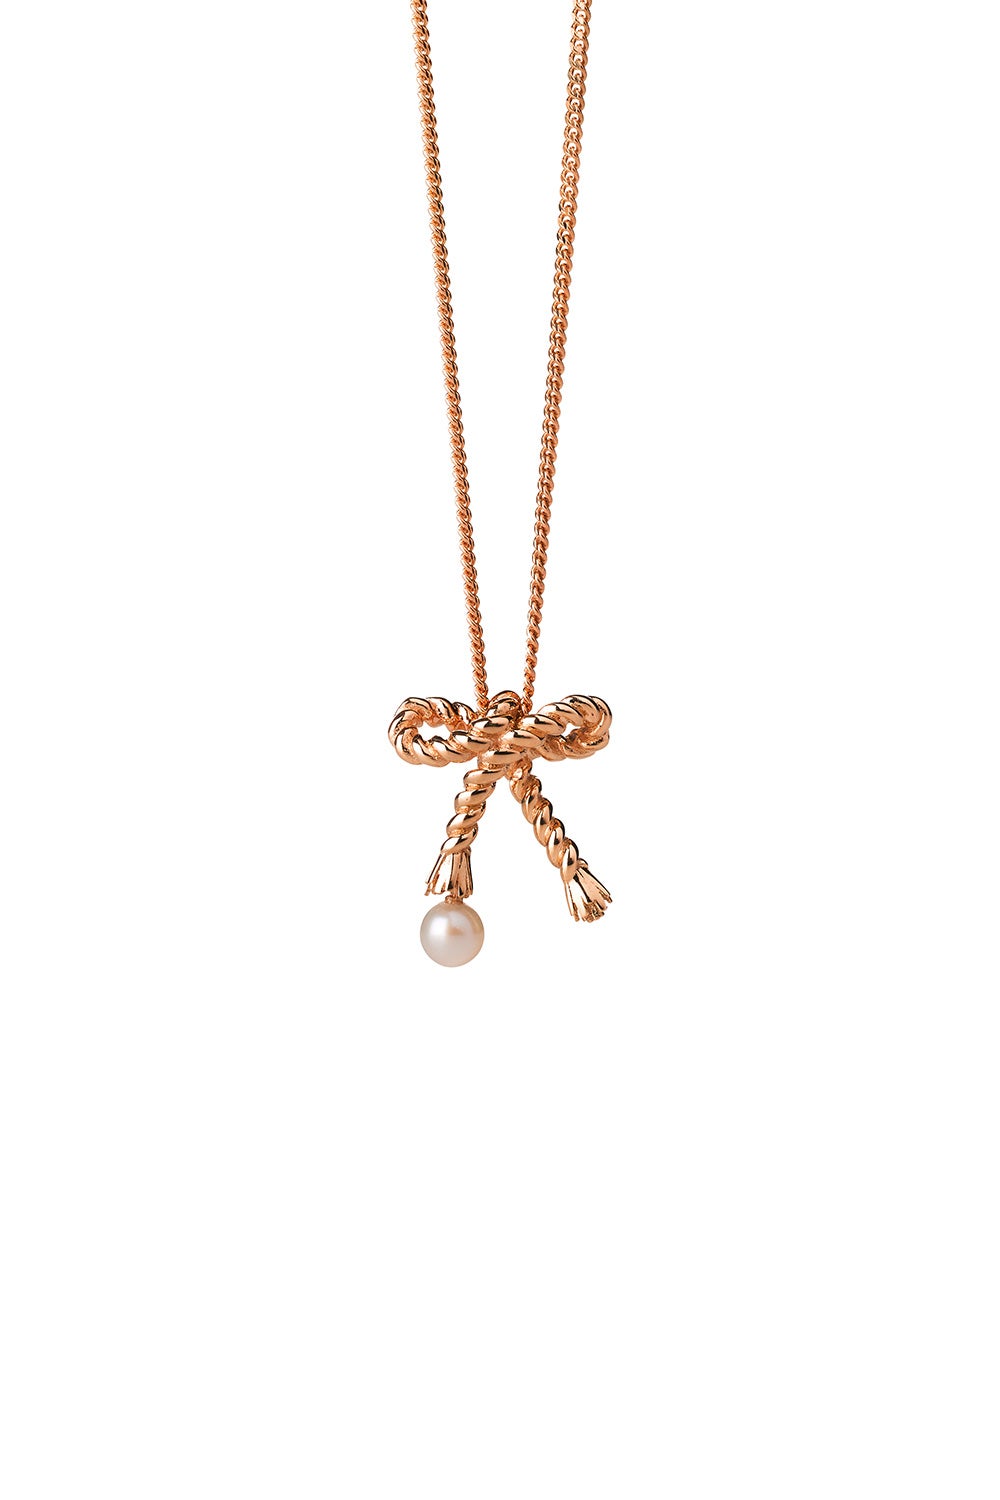 Tiffany Knot Necklace in Rose Gold with Diamonds | Tiffany & Co.